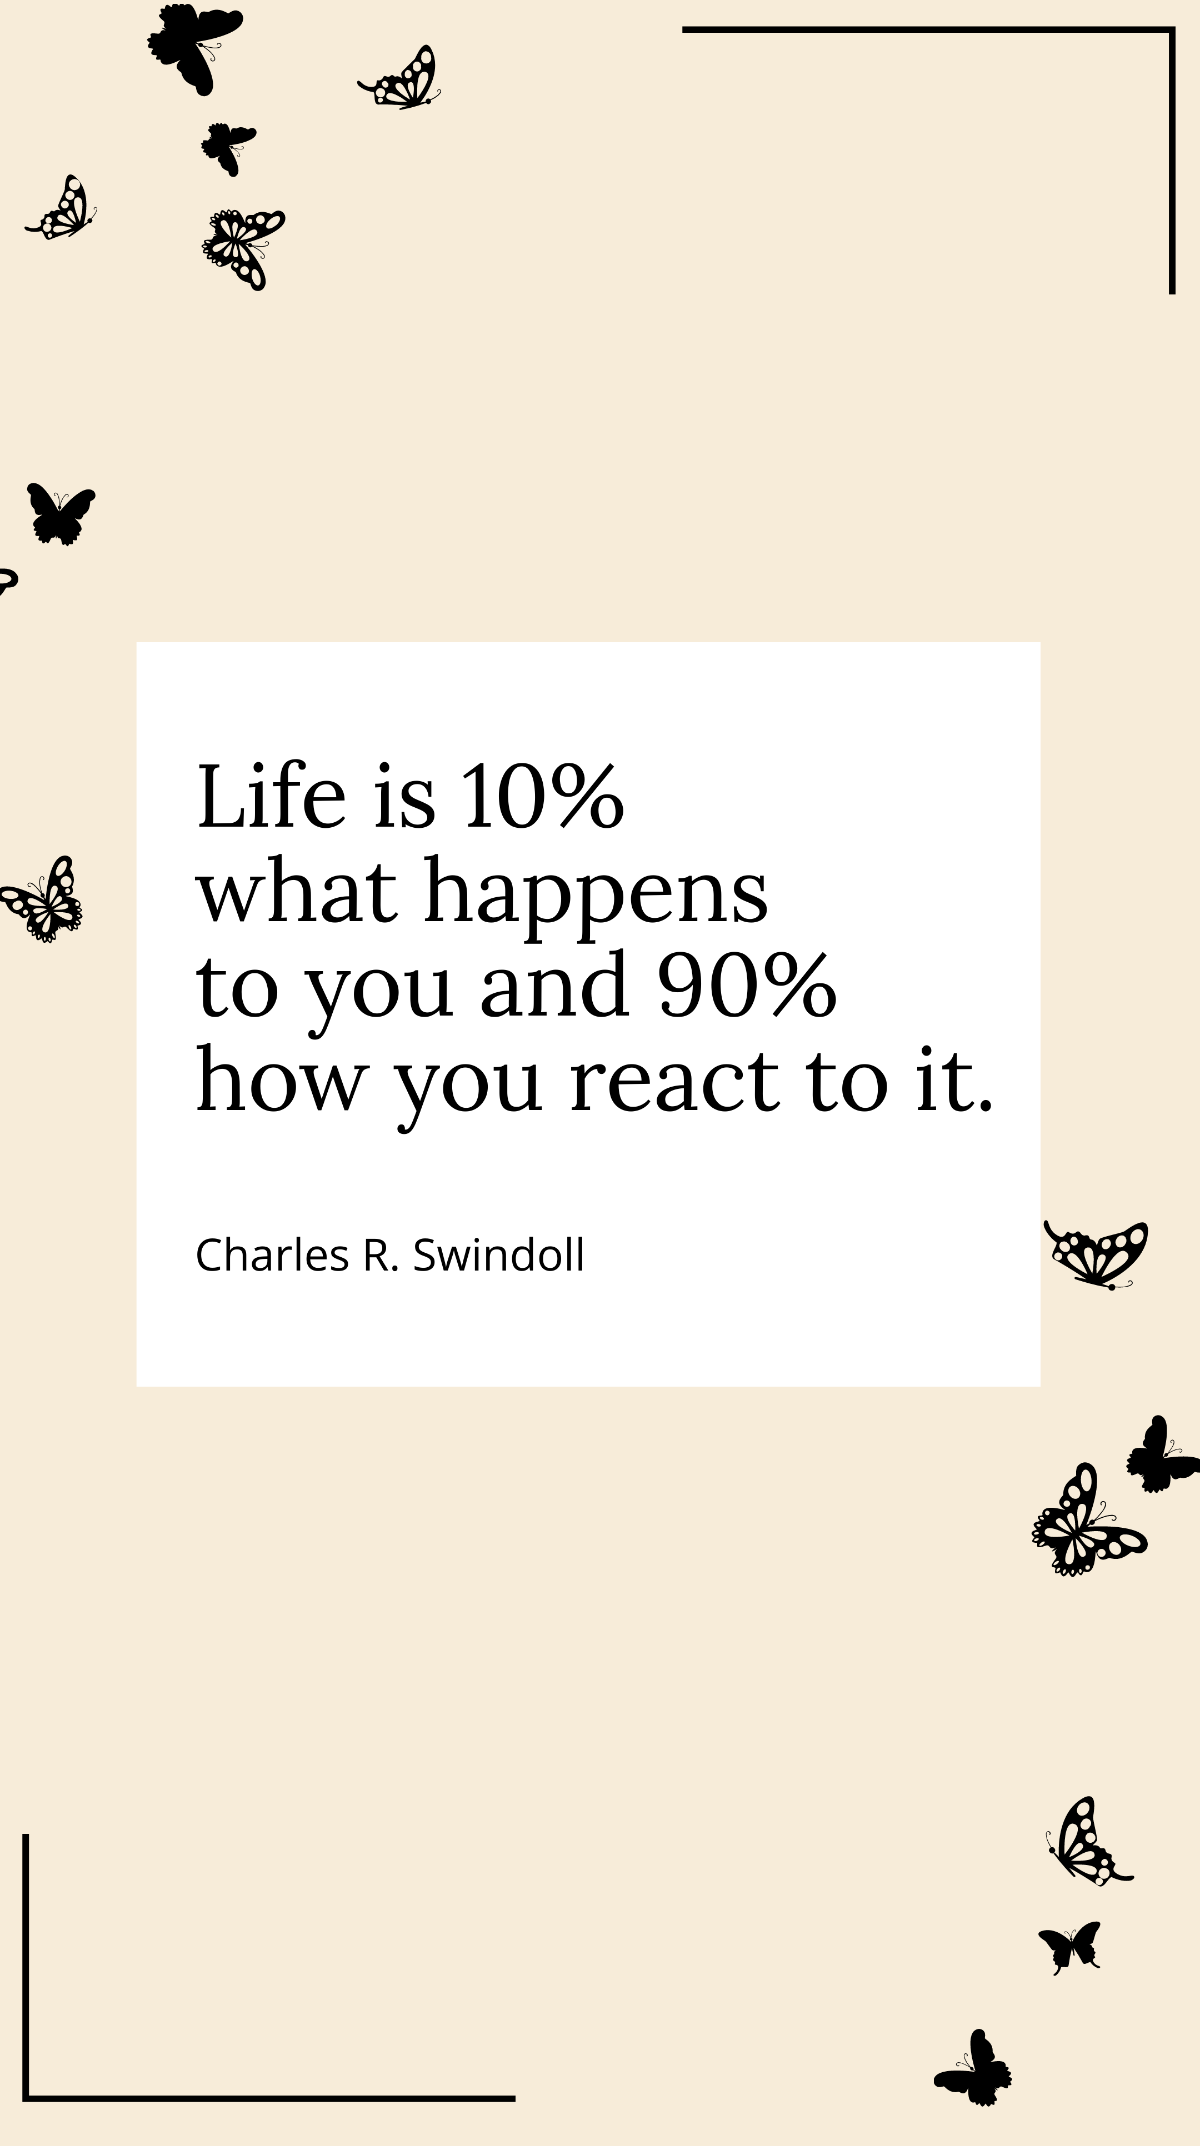 Charles R. Swindoll - Life is 10% what happens to you and 90% how you react to it. Template